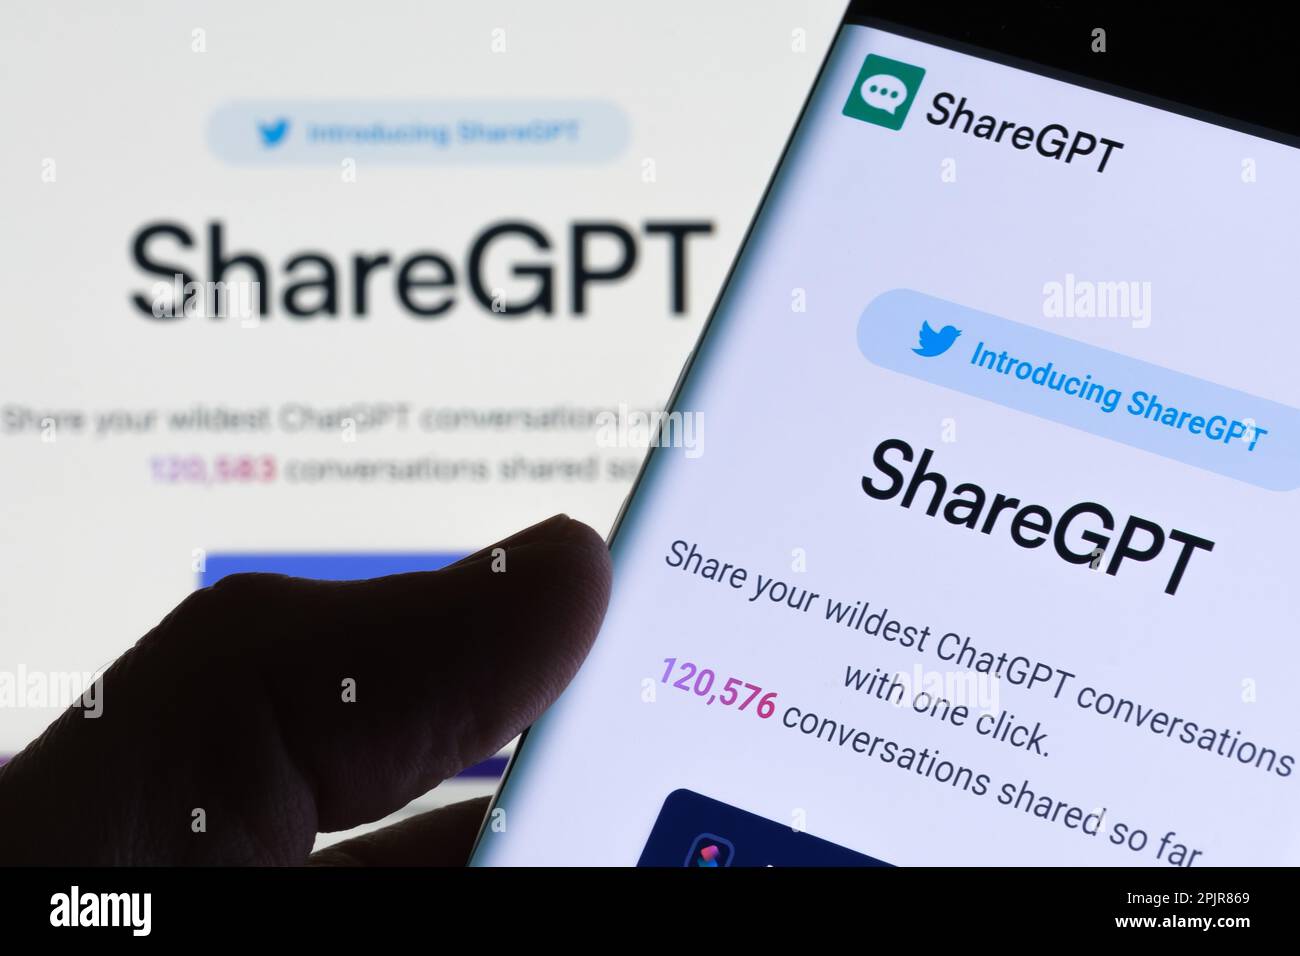 ShareGPT platform for sharing ChatGPT converations seen on screen of smartphone. Concept. Stafford, United Kingdom, April 3, 2023 Stock Photo